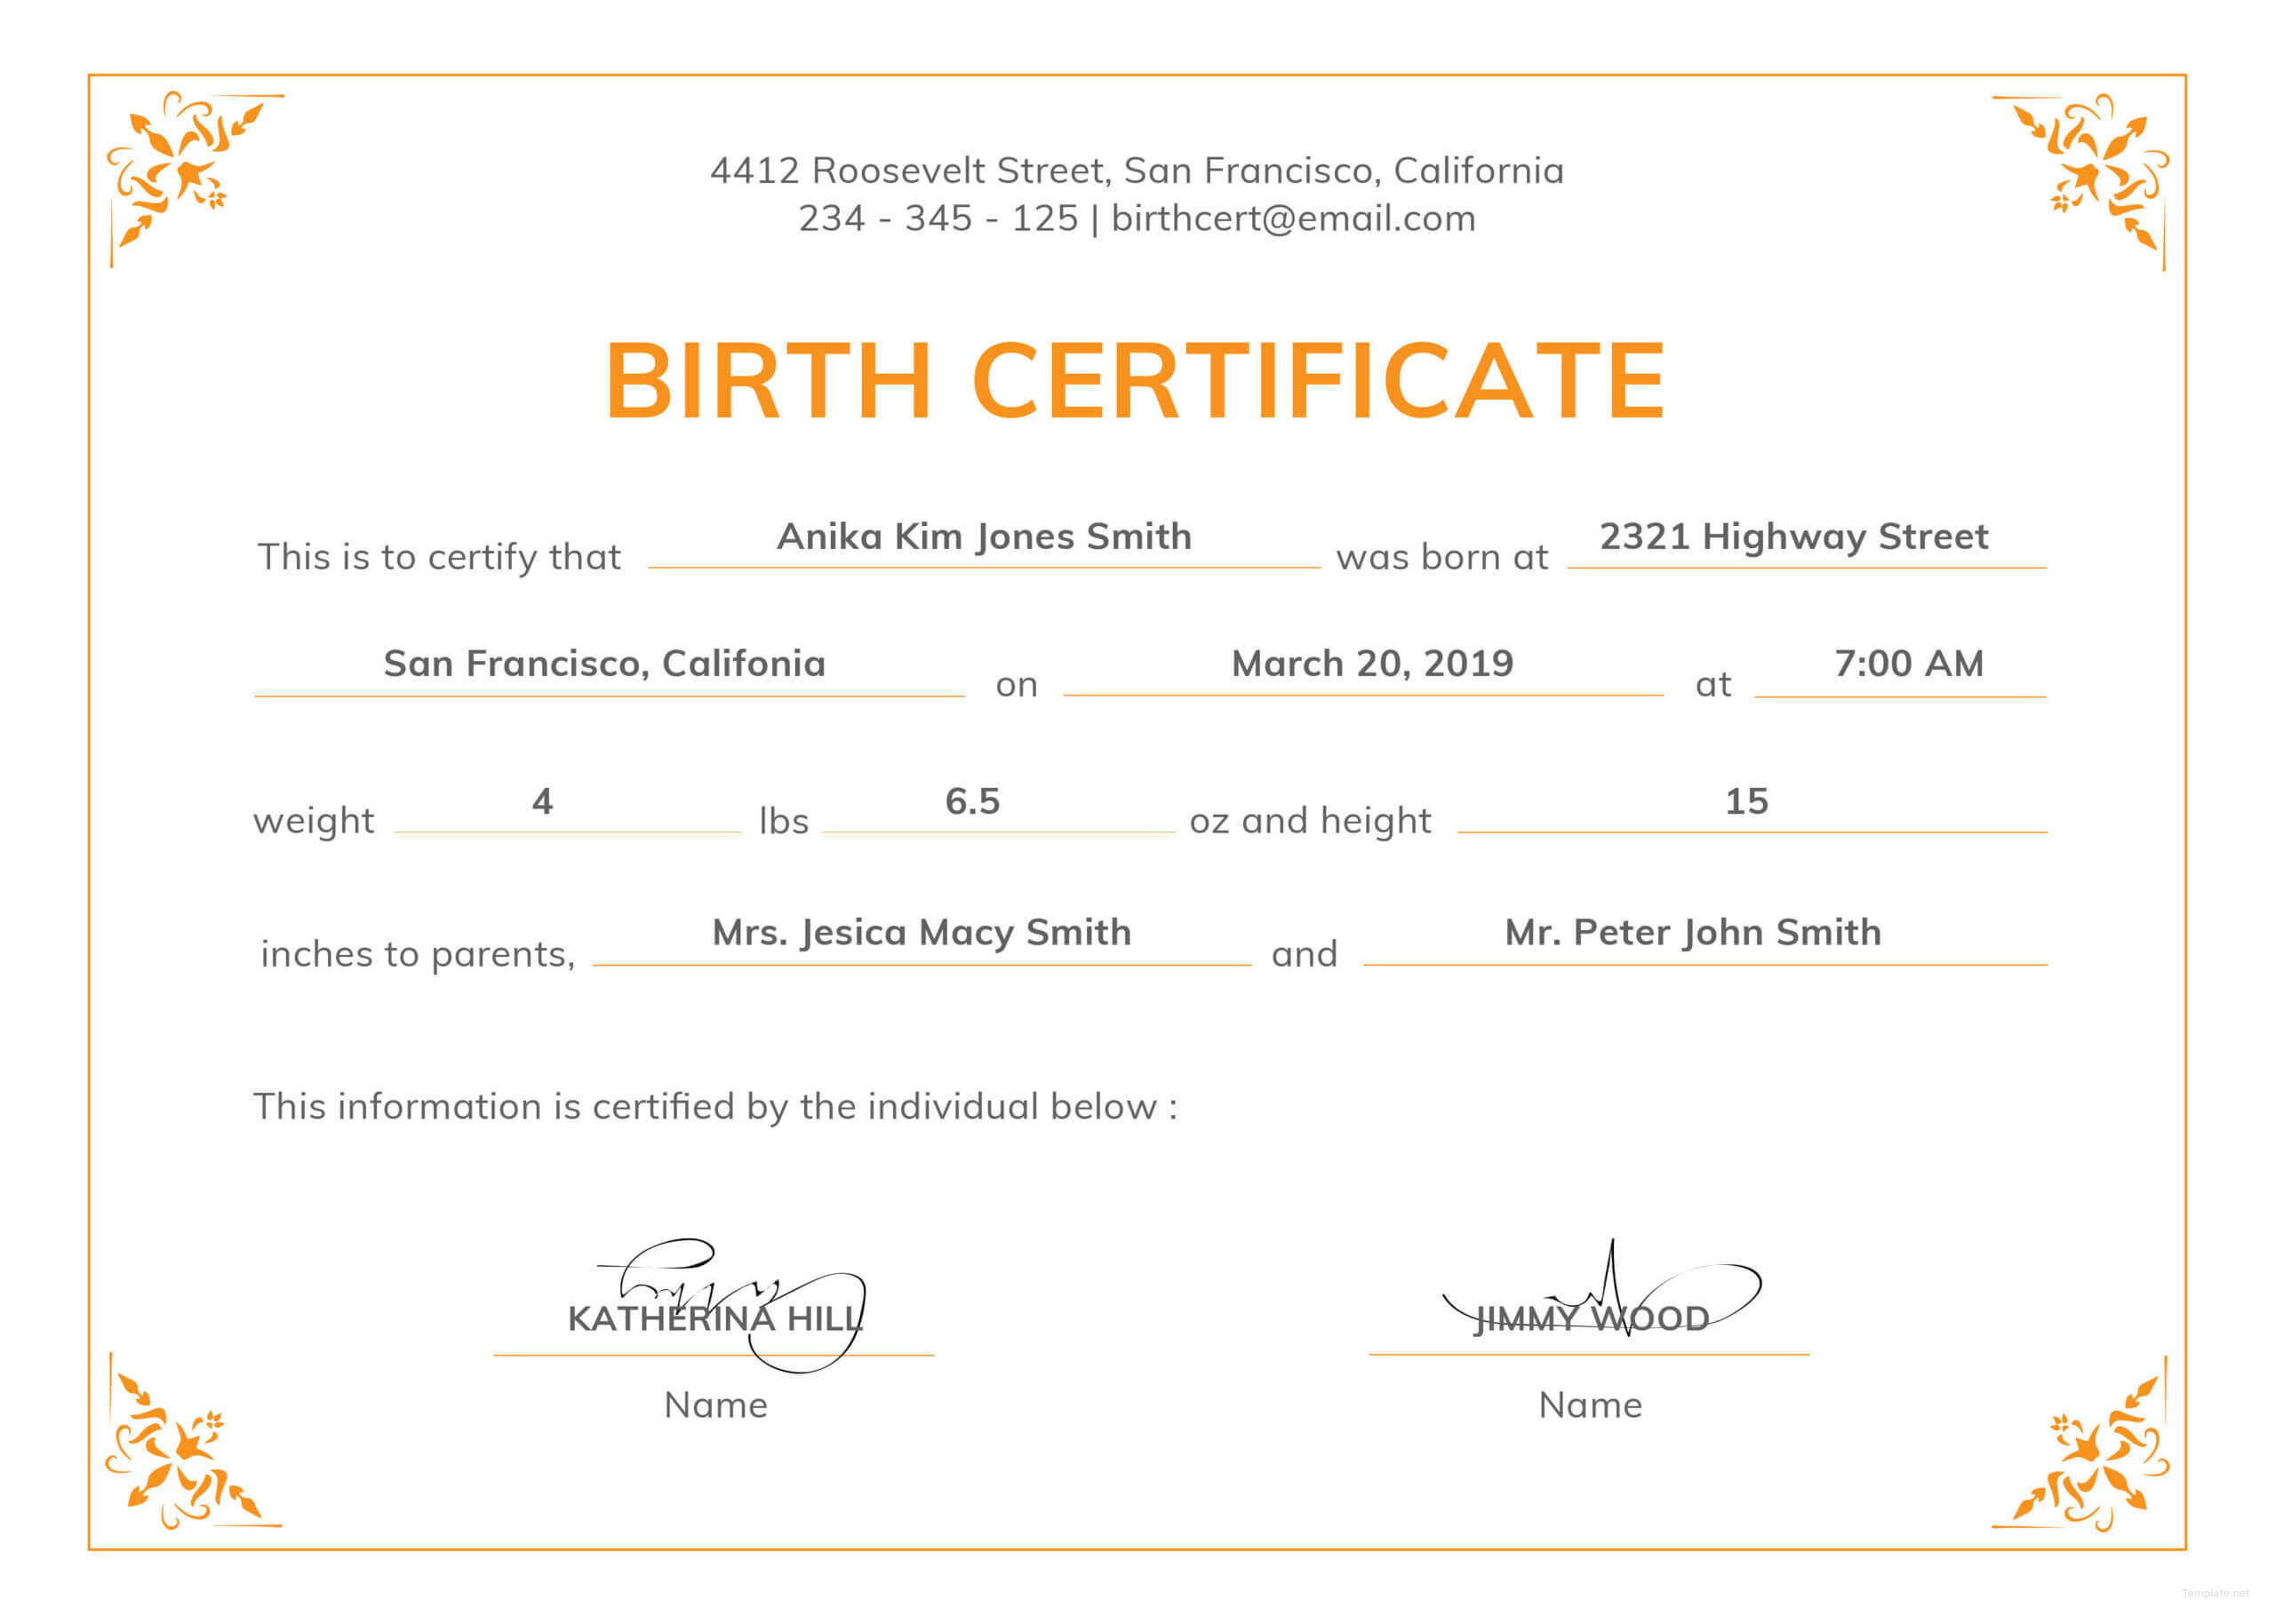 Official Blank Birth Certificate Template - Topa Within Birth Certificate Template Uk